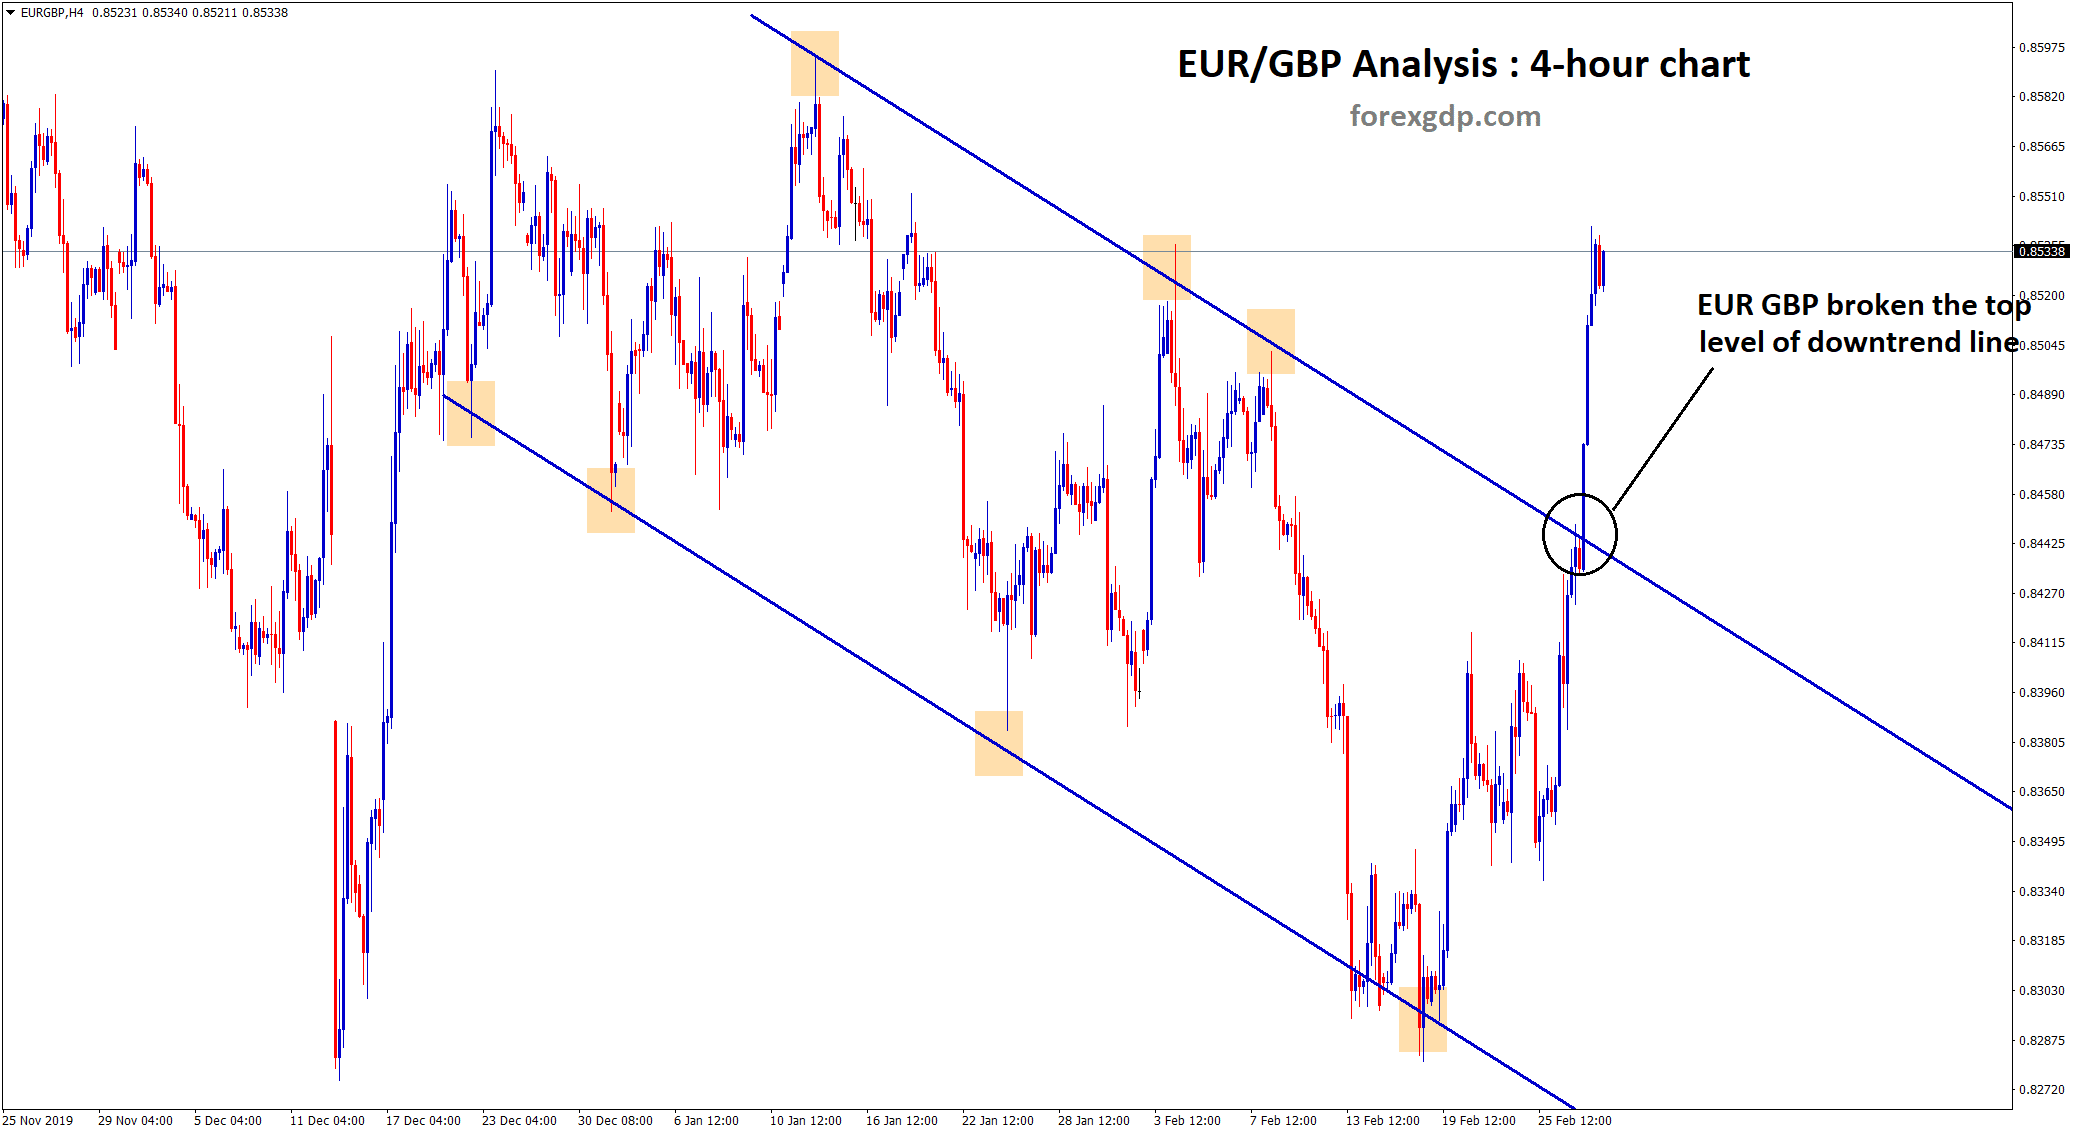 downtrend line of eur gbp breakout